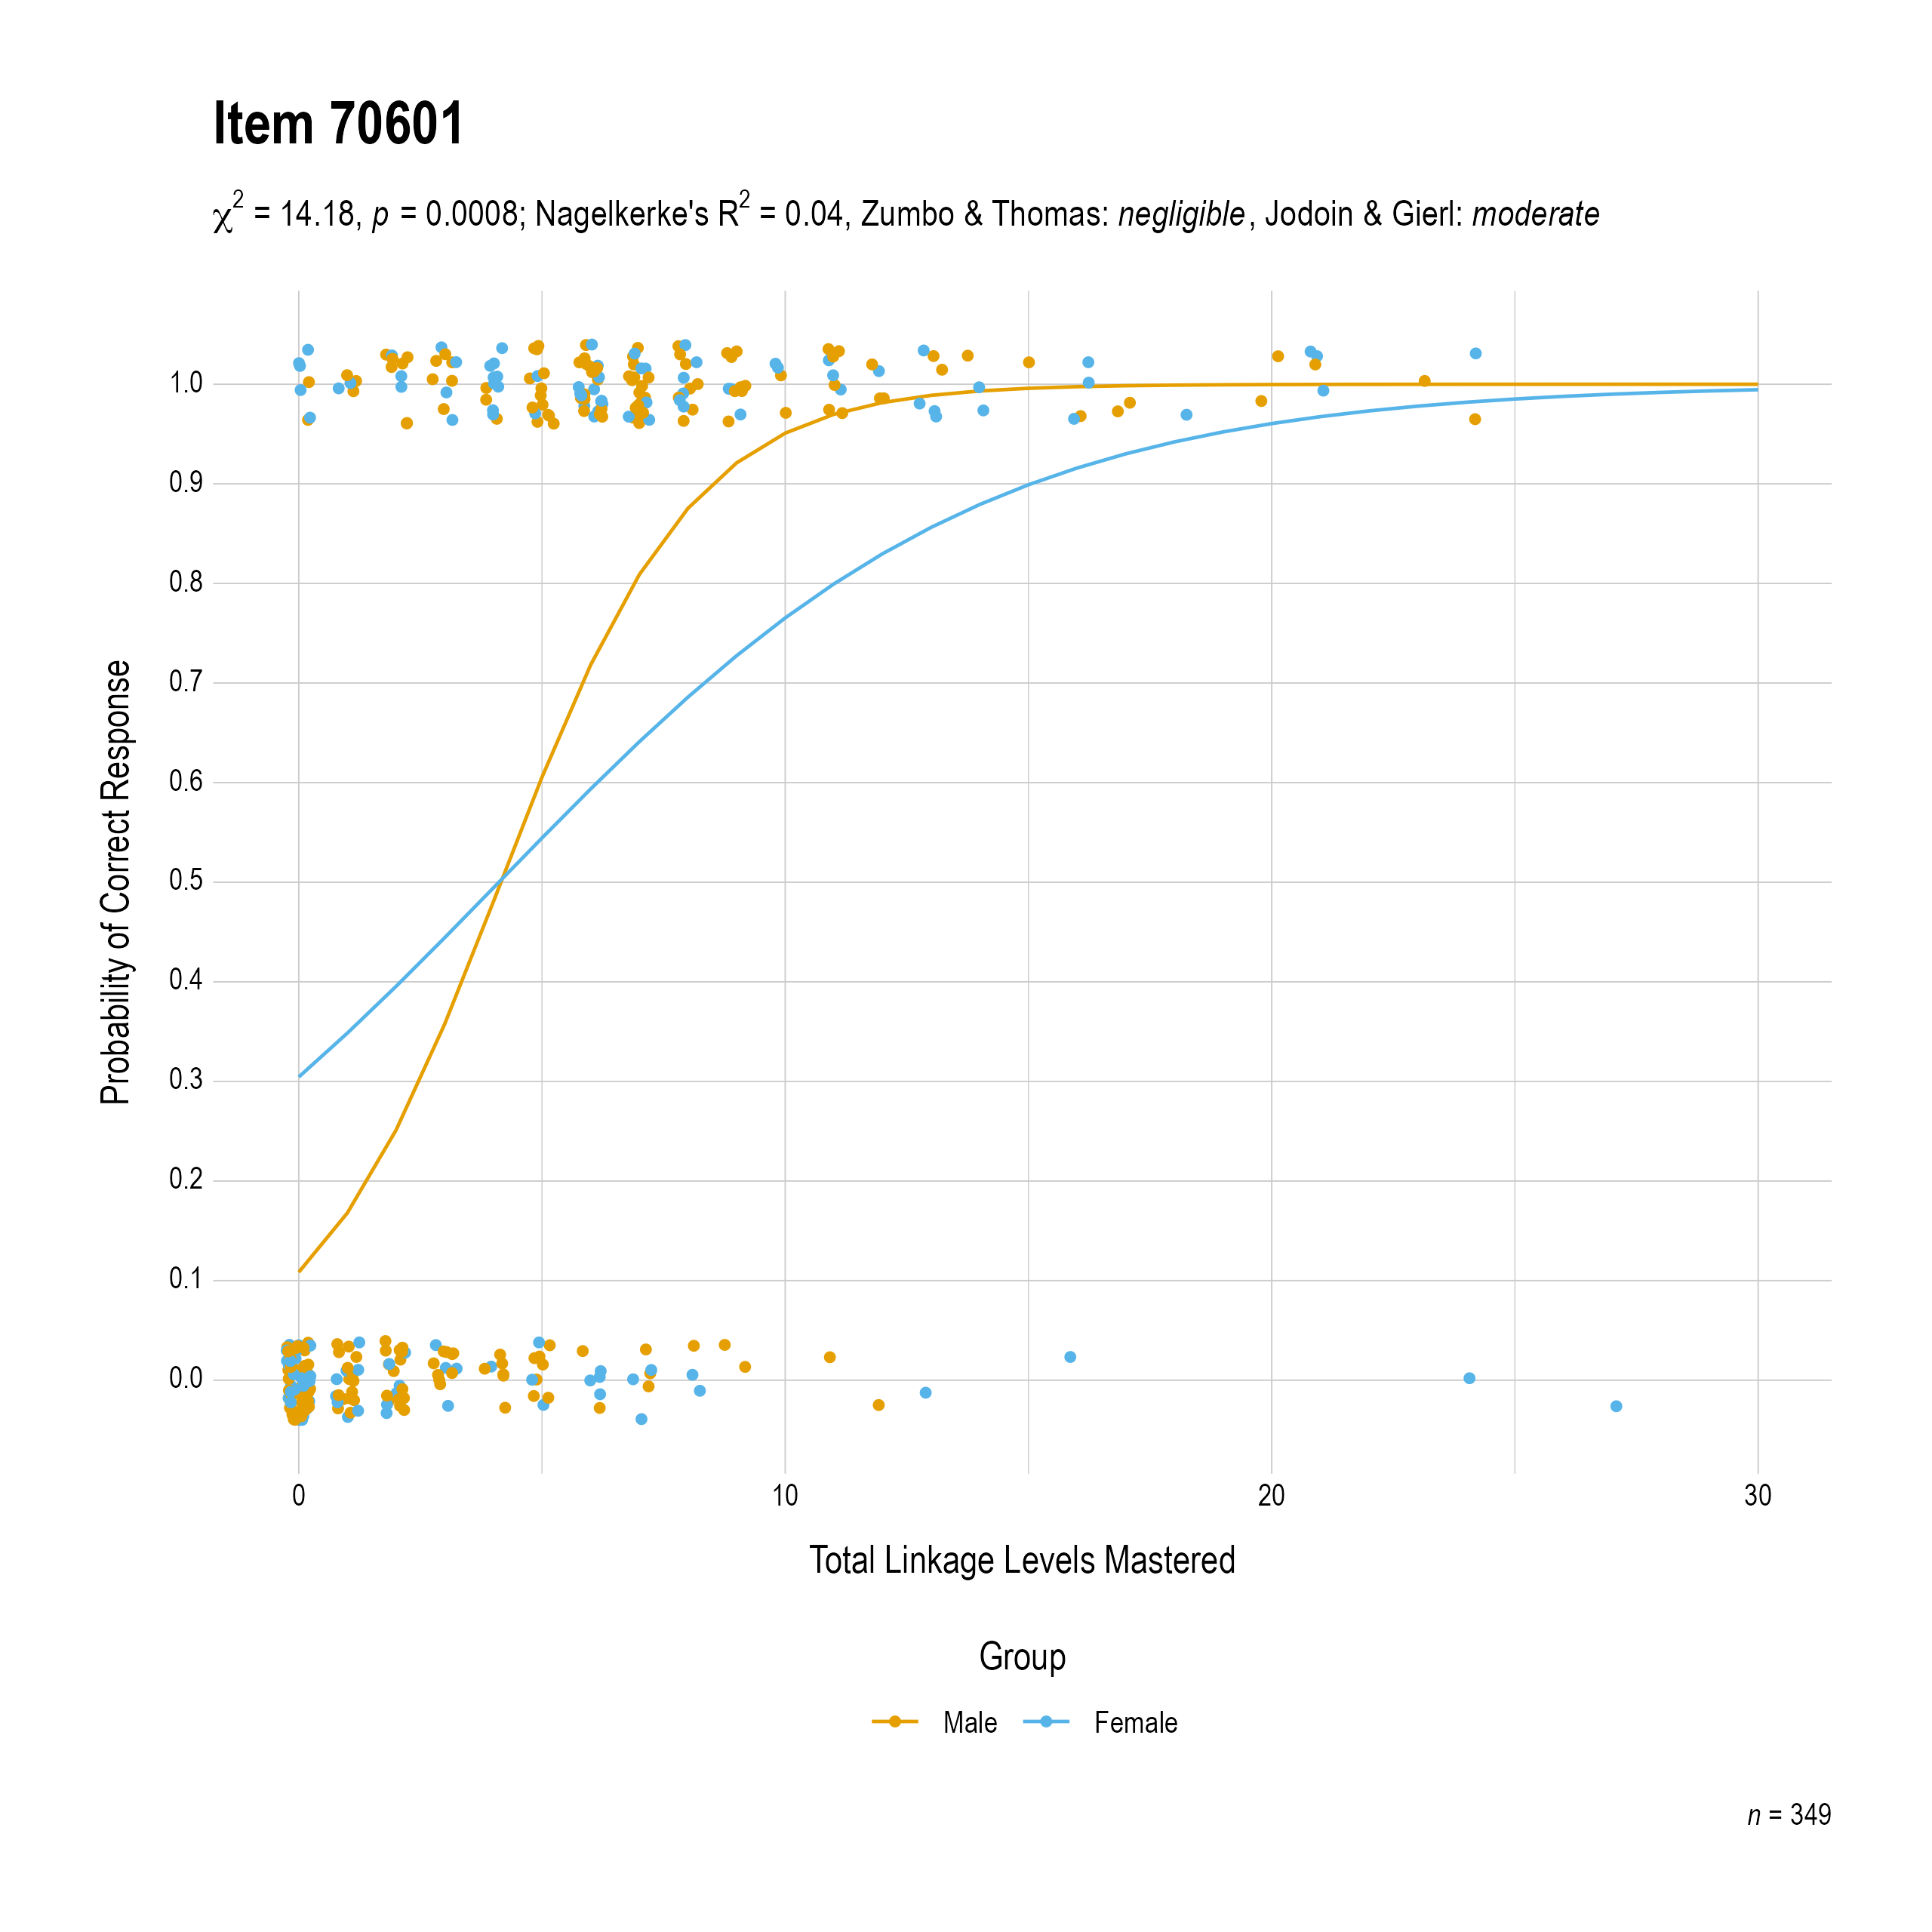 The plot of the combined gender differential item function evidence for Mathematics item 70601. The figure contains points shaded by group. The figure also contains a logistic regression curve for each group. The total linkage levels mastered in is on the x-axis, and the probability of a correct response is on the y-axis.